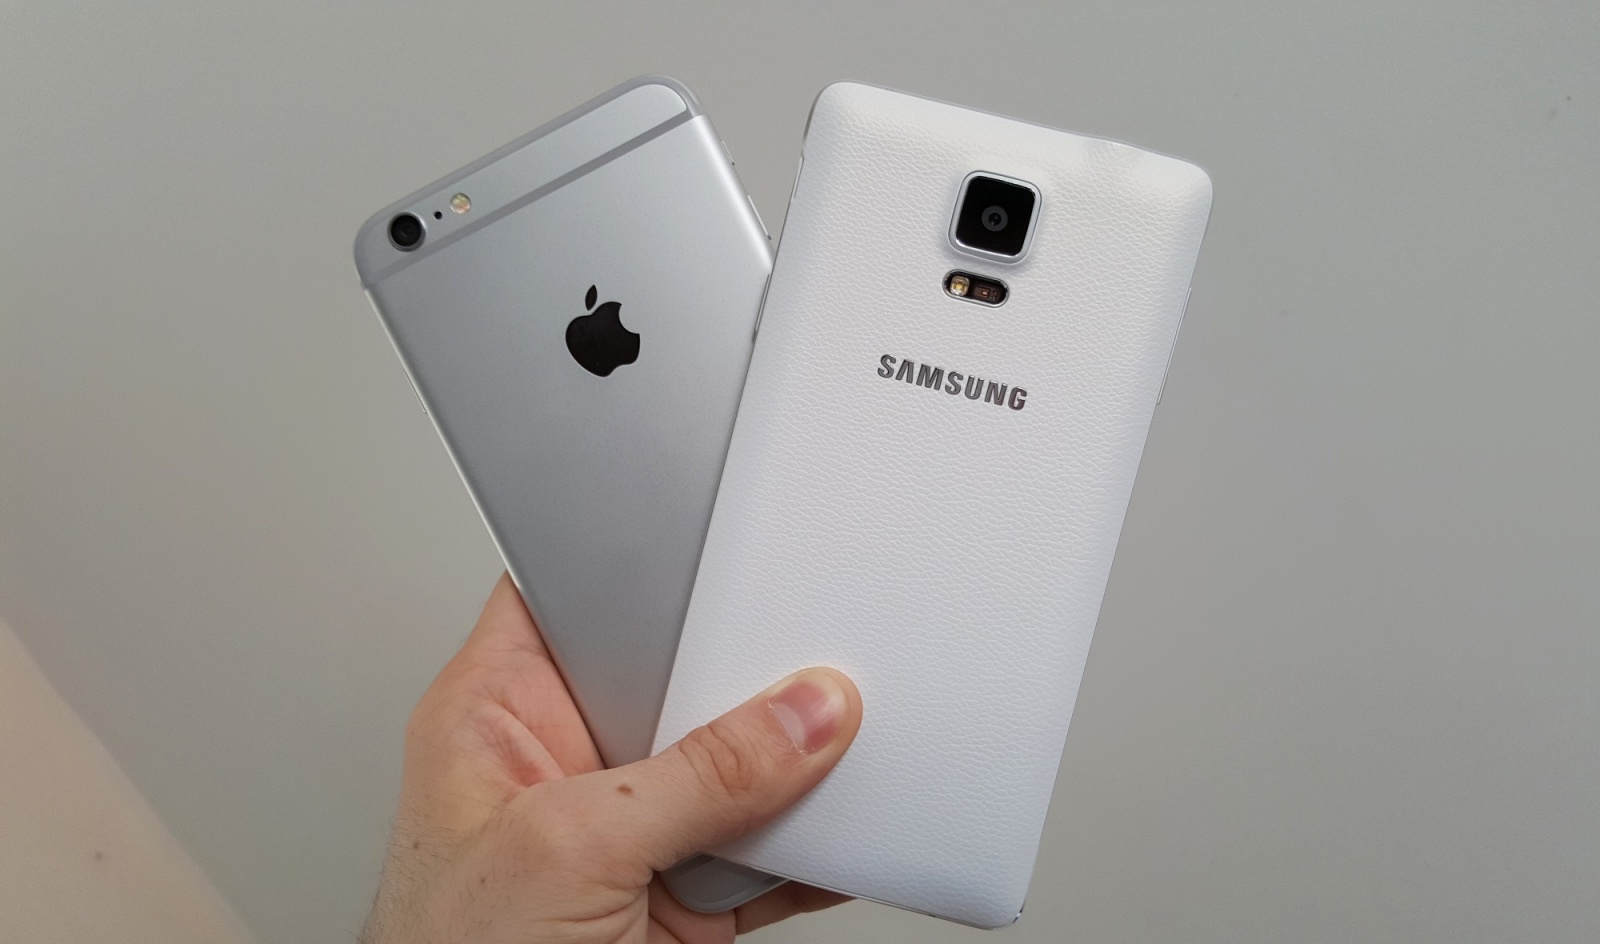 chief-exec-admits-samsung-is-in-trouble-this-year-image-cultofandroidcomwp-contentuploads201504iPhone-6-Plus-vs-Note-4-jpg